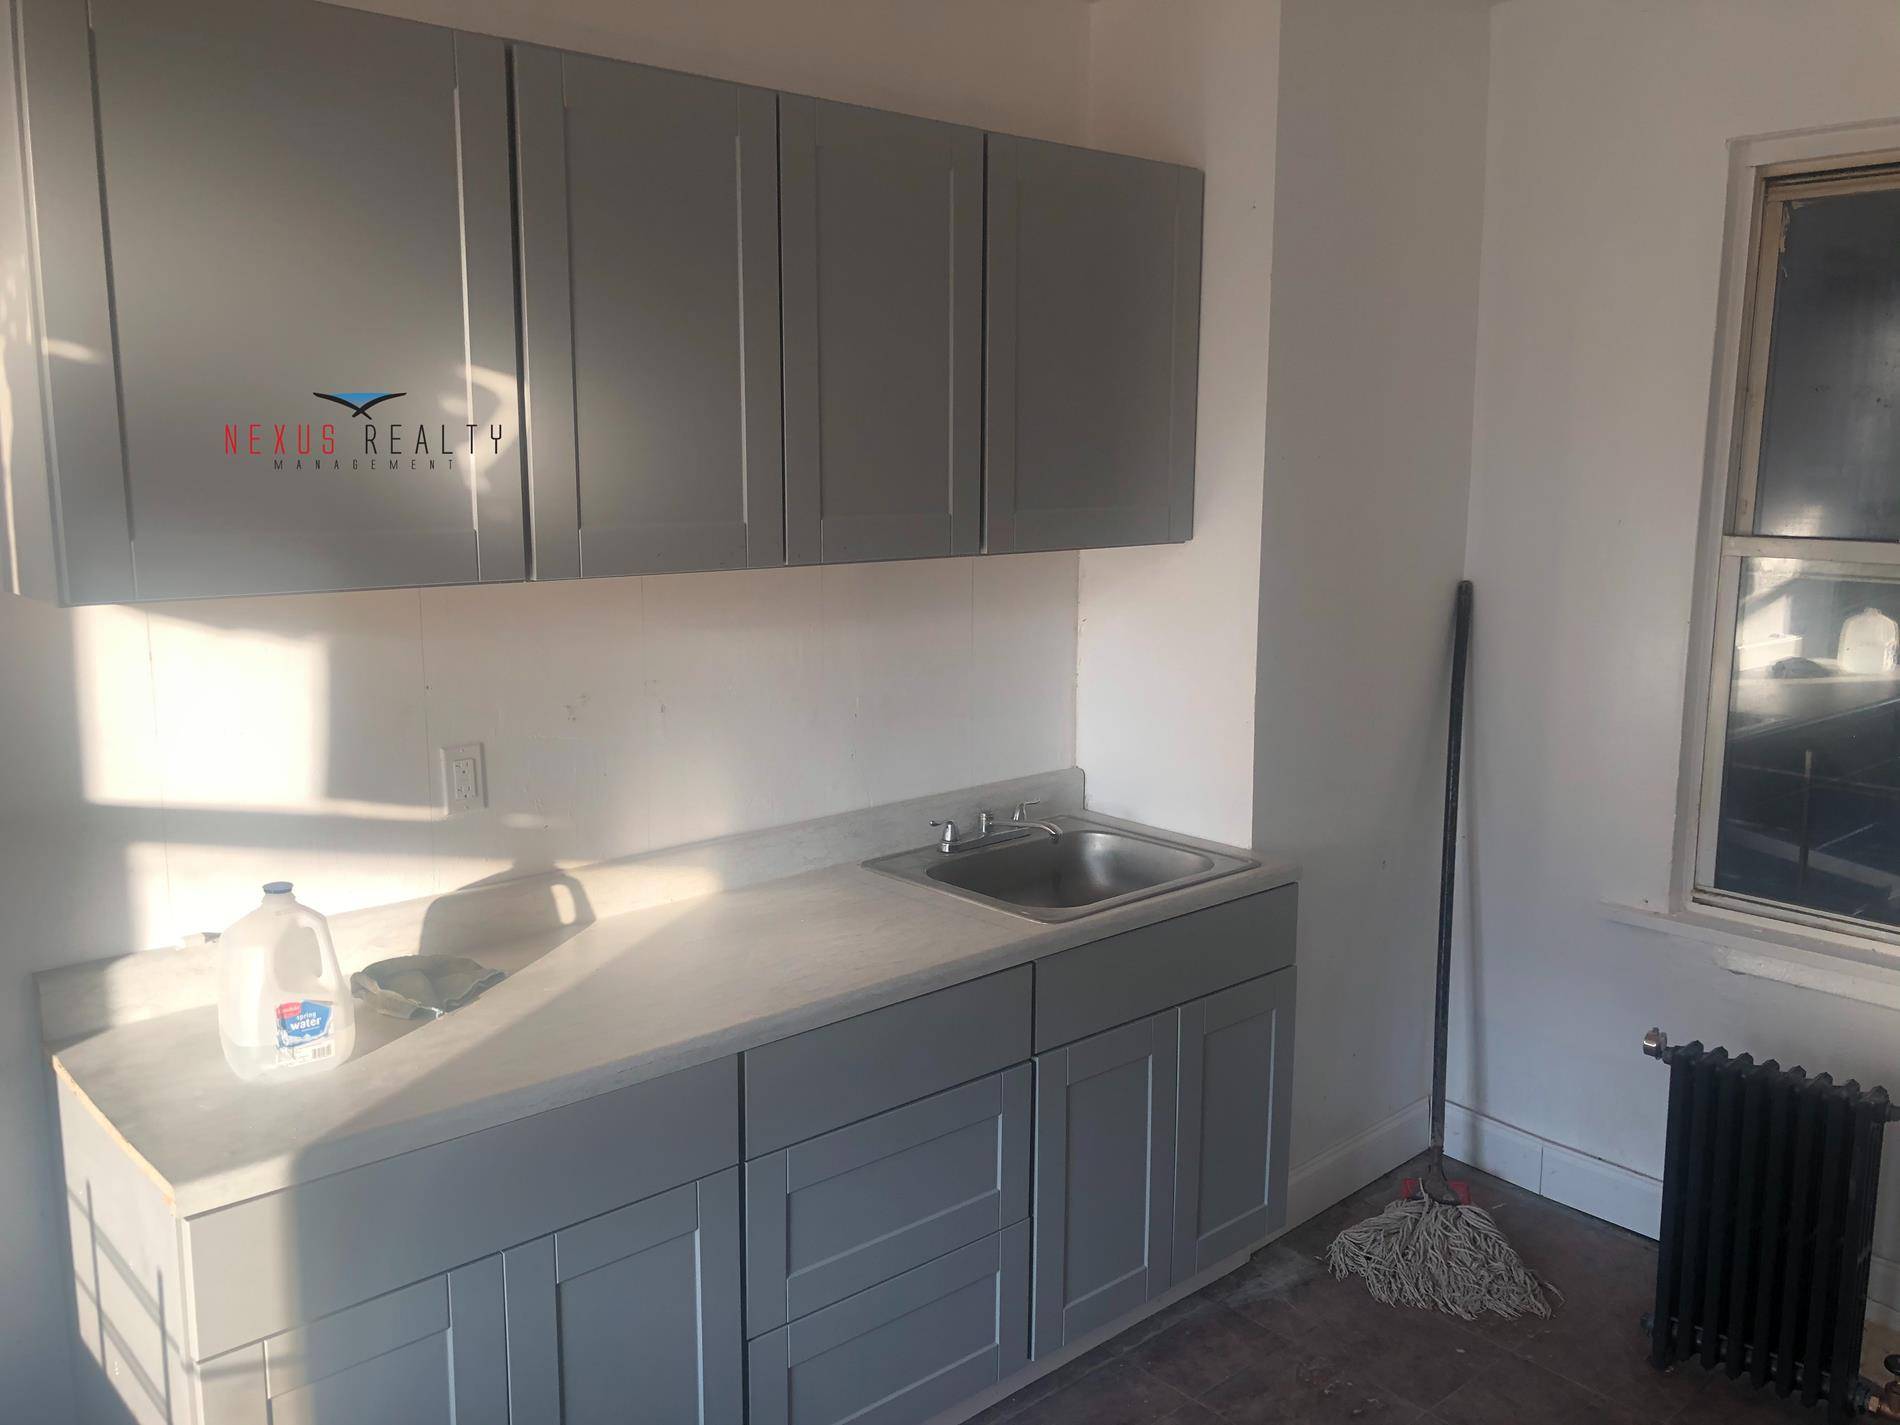 Renovated 3 Bedroom apartment in Jackson Heights 26001 King size and 2 smaller bedrooms on the 2nd floor in a 3 story walk up buildingSpacious kitchen with new cabinetsHuge living ...